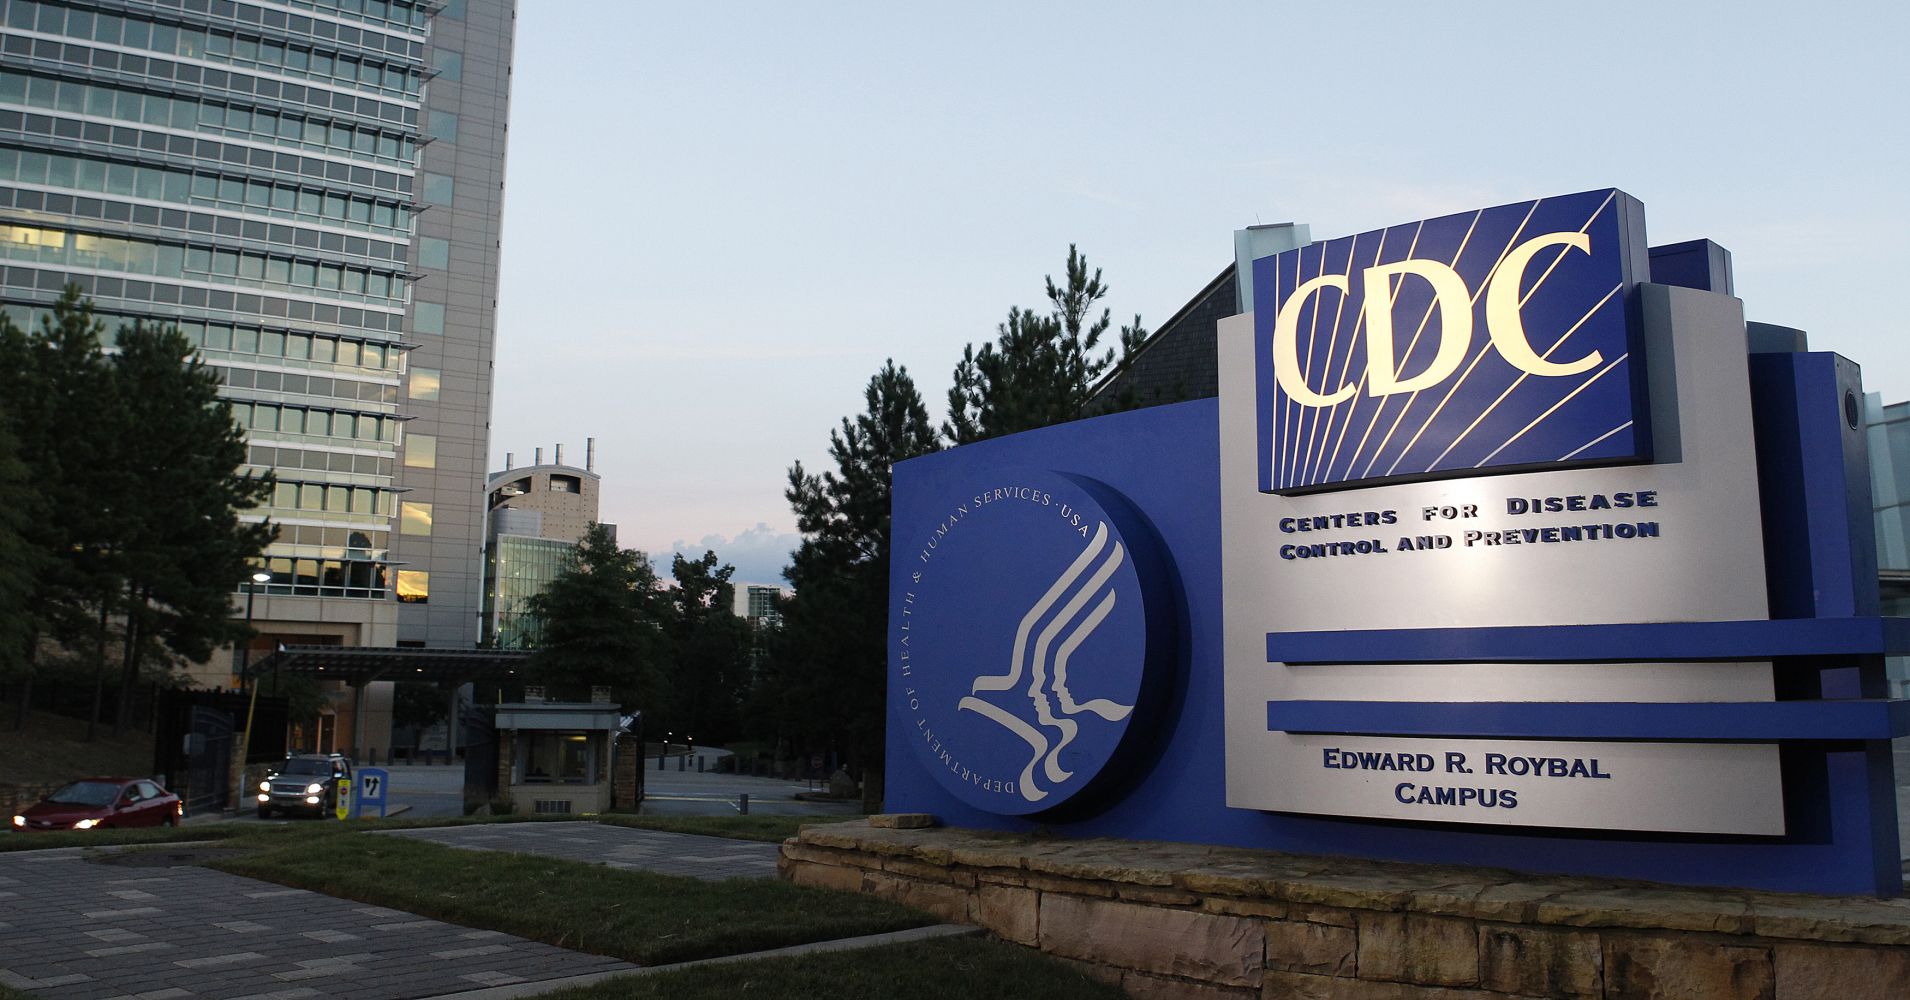 The Centers for Disease Control and Prevention (CDC) headquarters in Atlanta, Georgia.